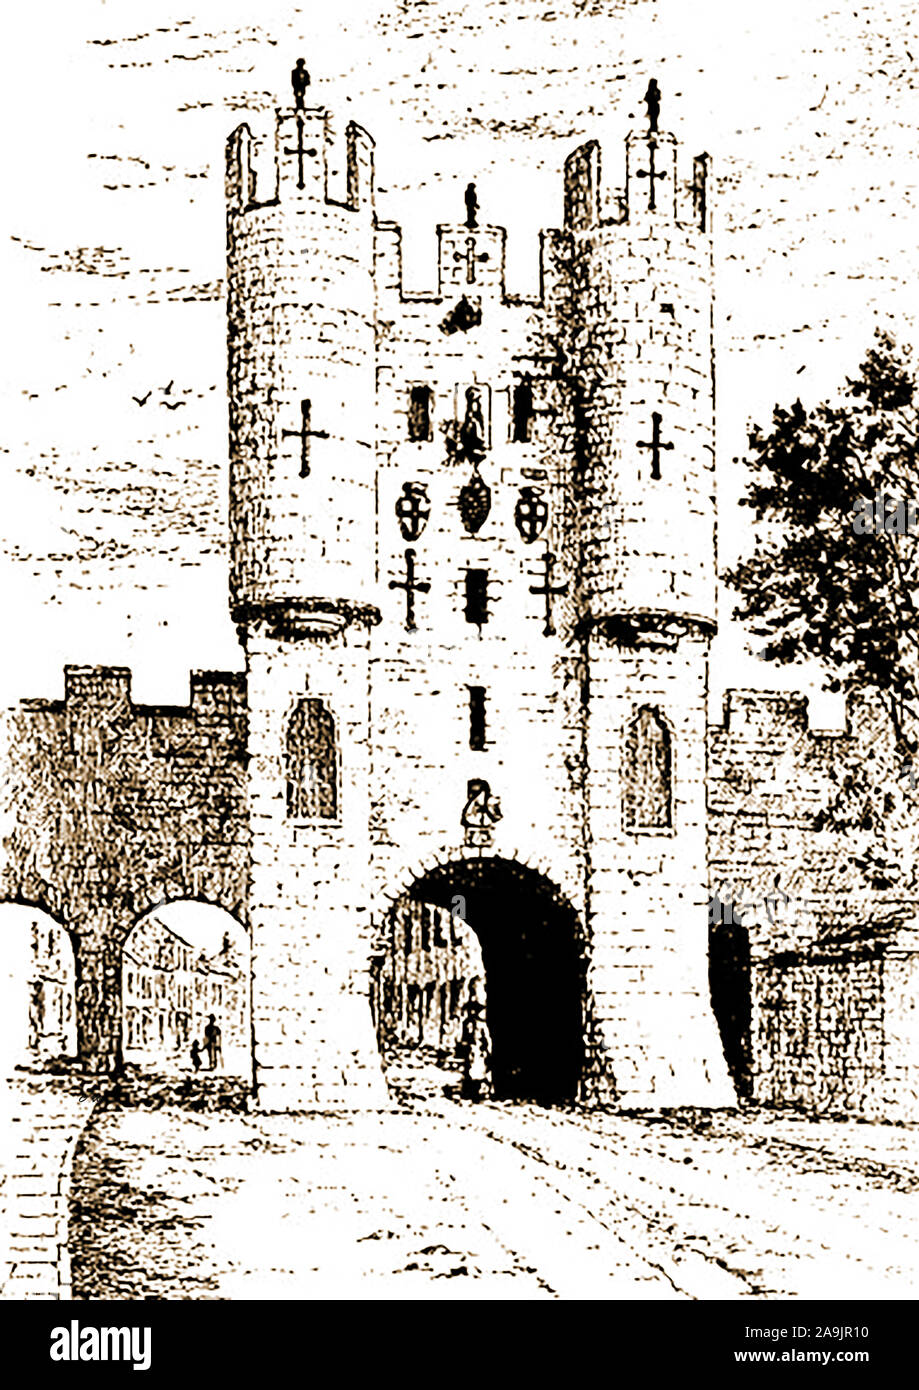 An old print of Micklegate Bar, York, UK before removal of the 4th arch (left). This and much of the rest of the city walls are still intact. This, the main,southern  and ceremonial  entrance to the old city was erected between 1196 – 1230 on older foundations and has been changed over the years including the removal  and restoration of its barbican, and the removal of its portcullis and fourth archway. In ancient times, the heads of criminals and traitors were attached to the building on skewers e.g. include Sir Henry Percy (Hotspur) in 1403 and Richard, Duke of York in 1460 Stock Photo